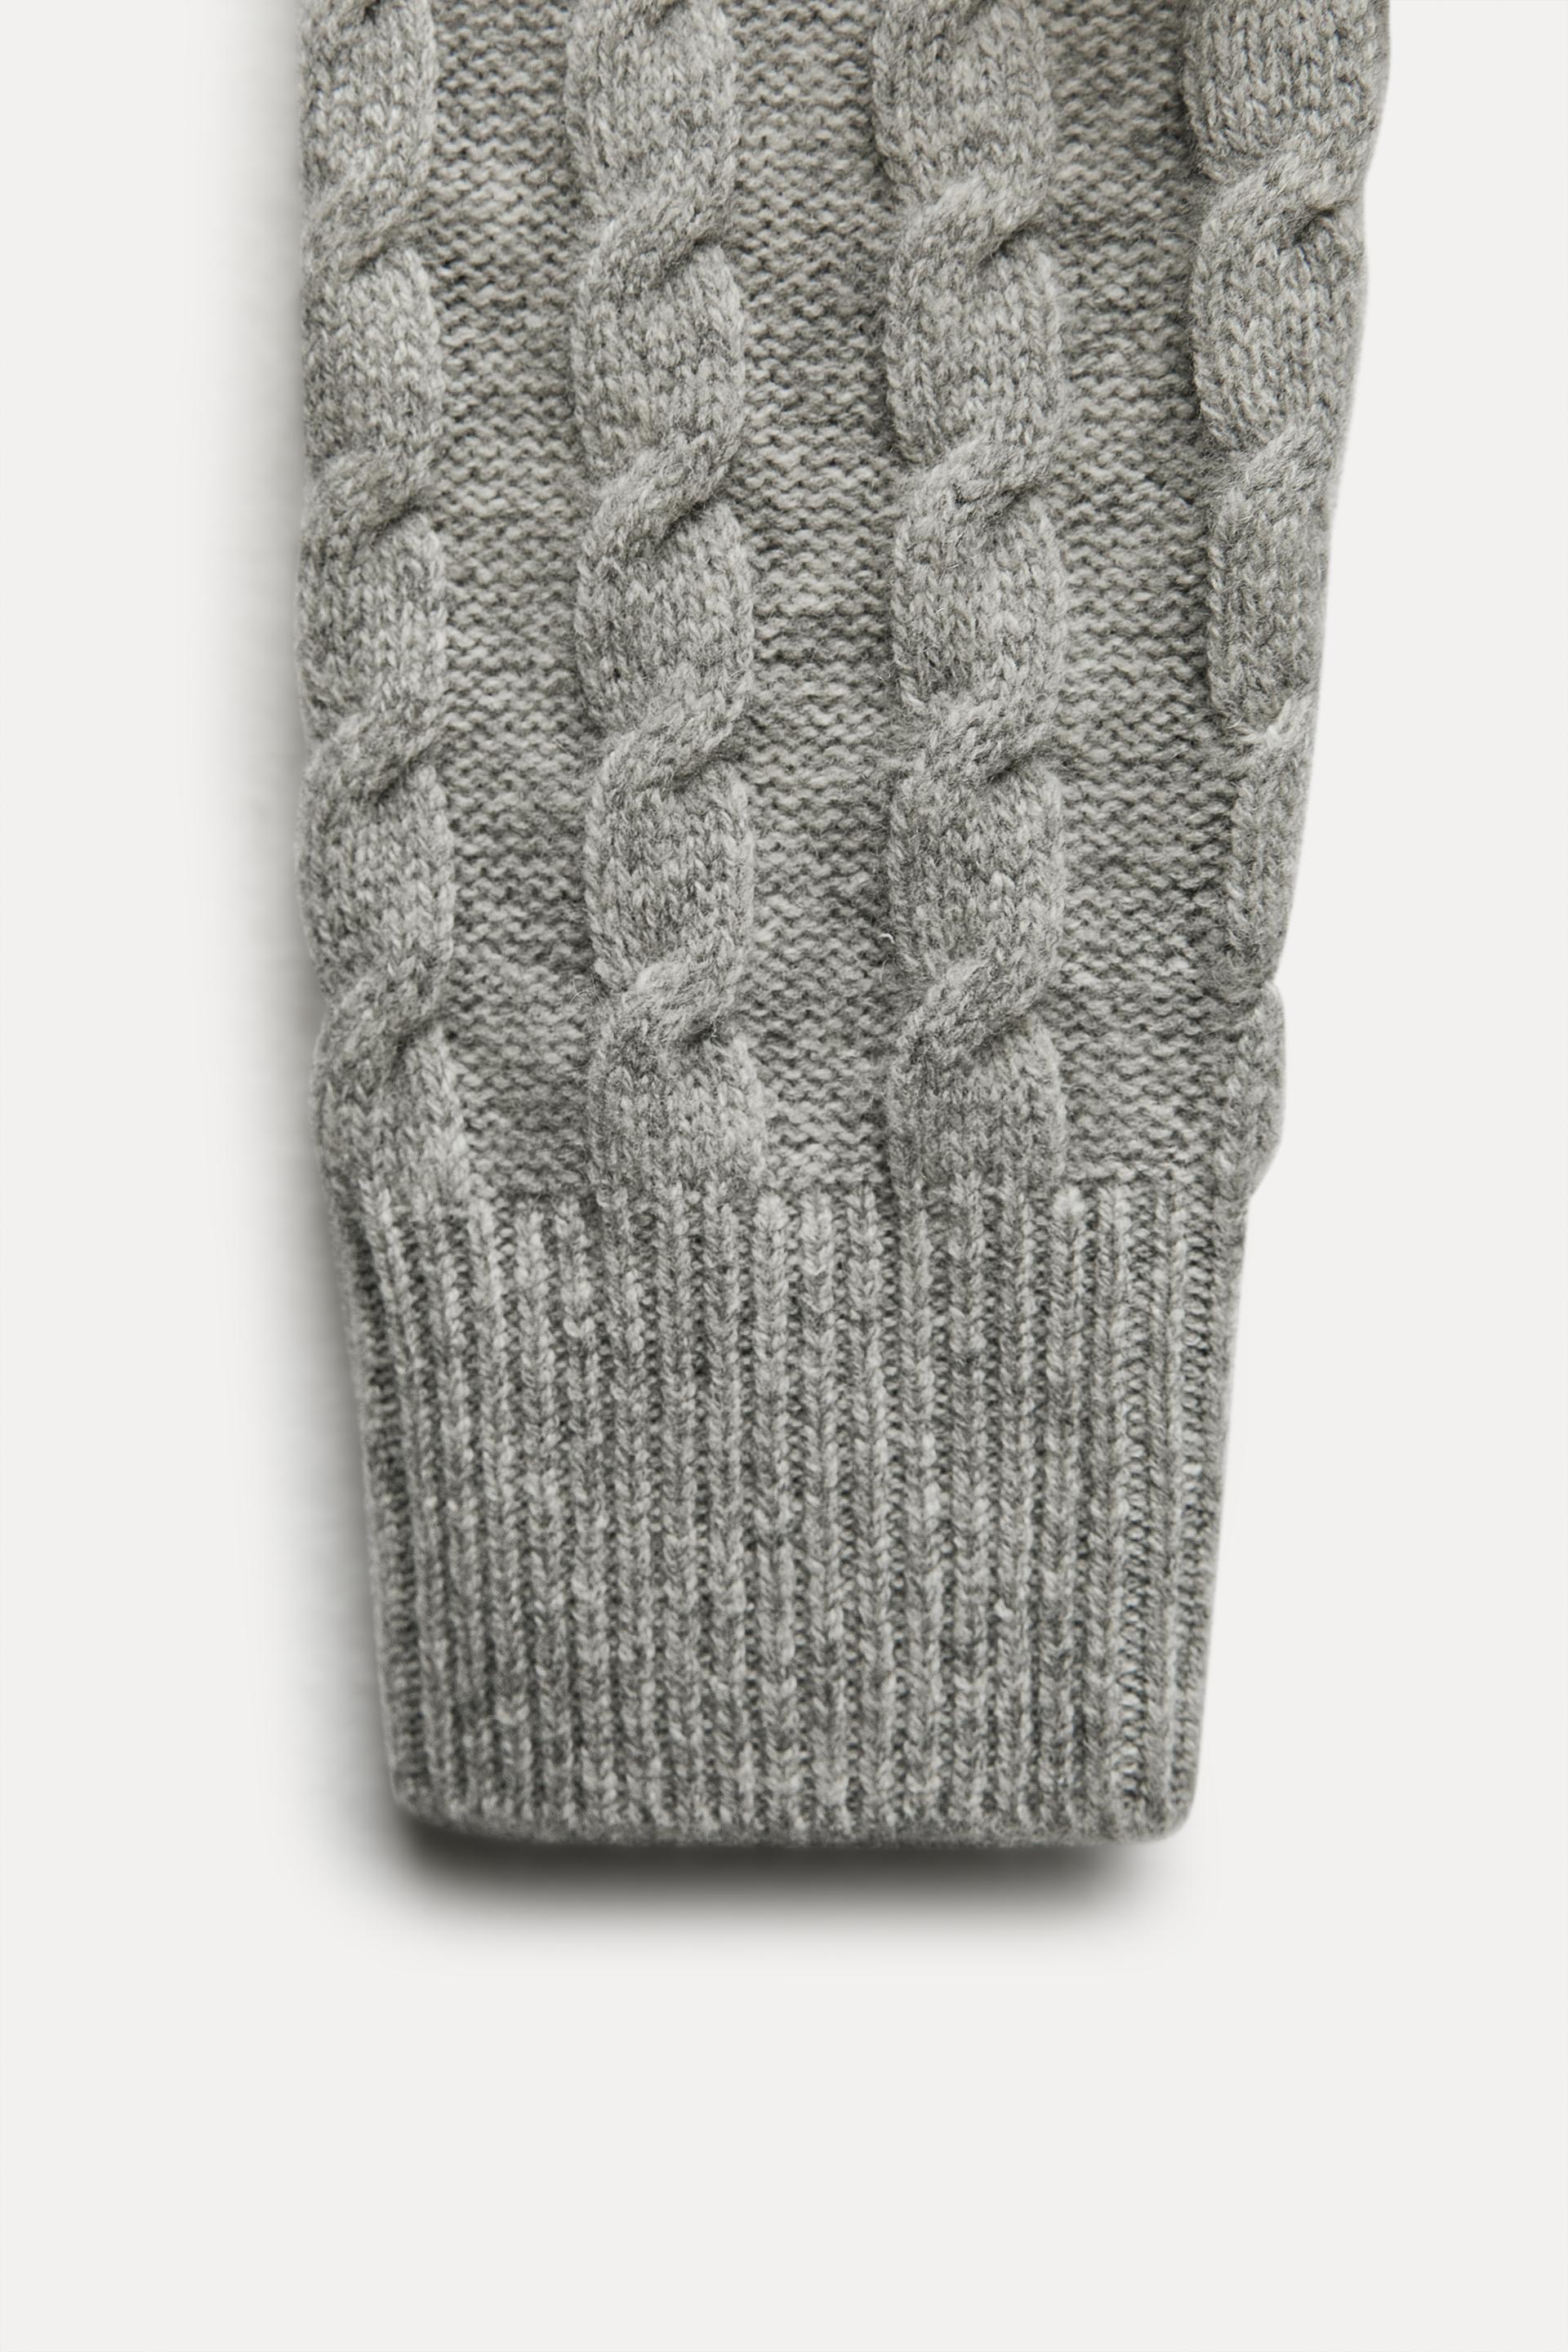 Buy Threadbare Grey Cable Knit Cardigan from the Next UK online shop